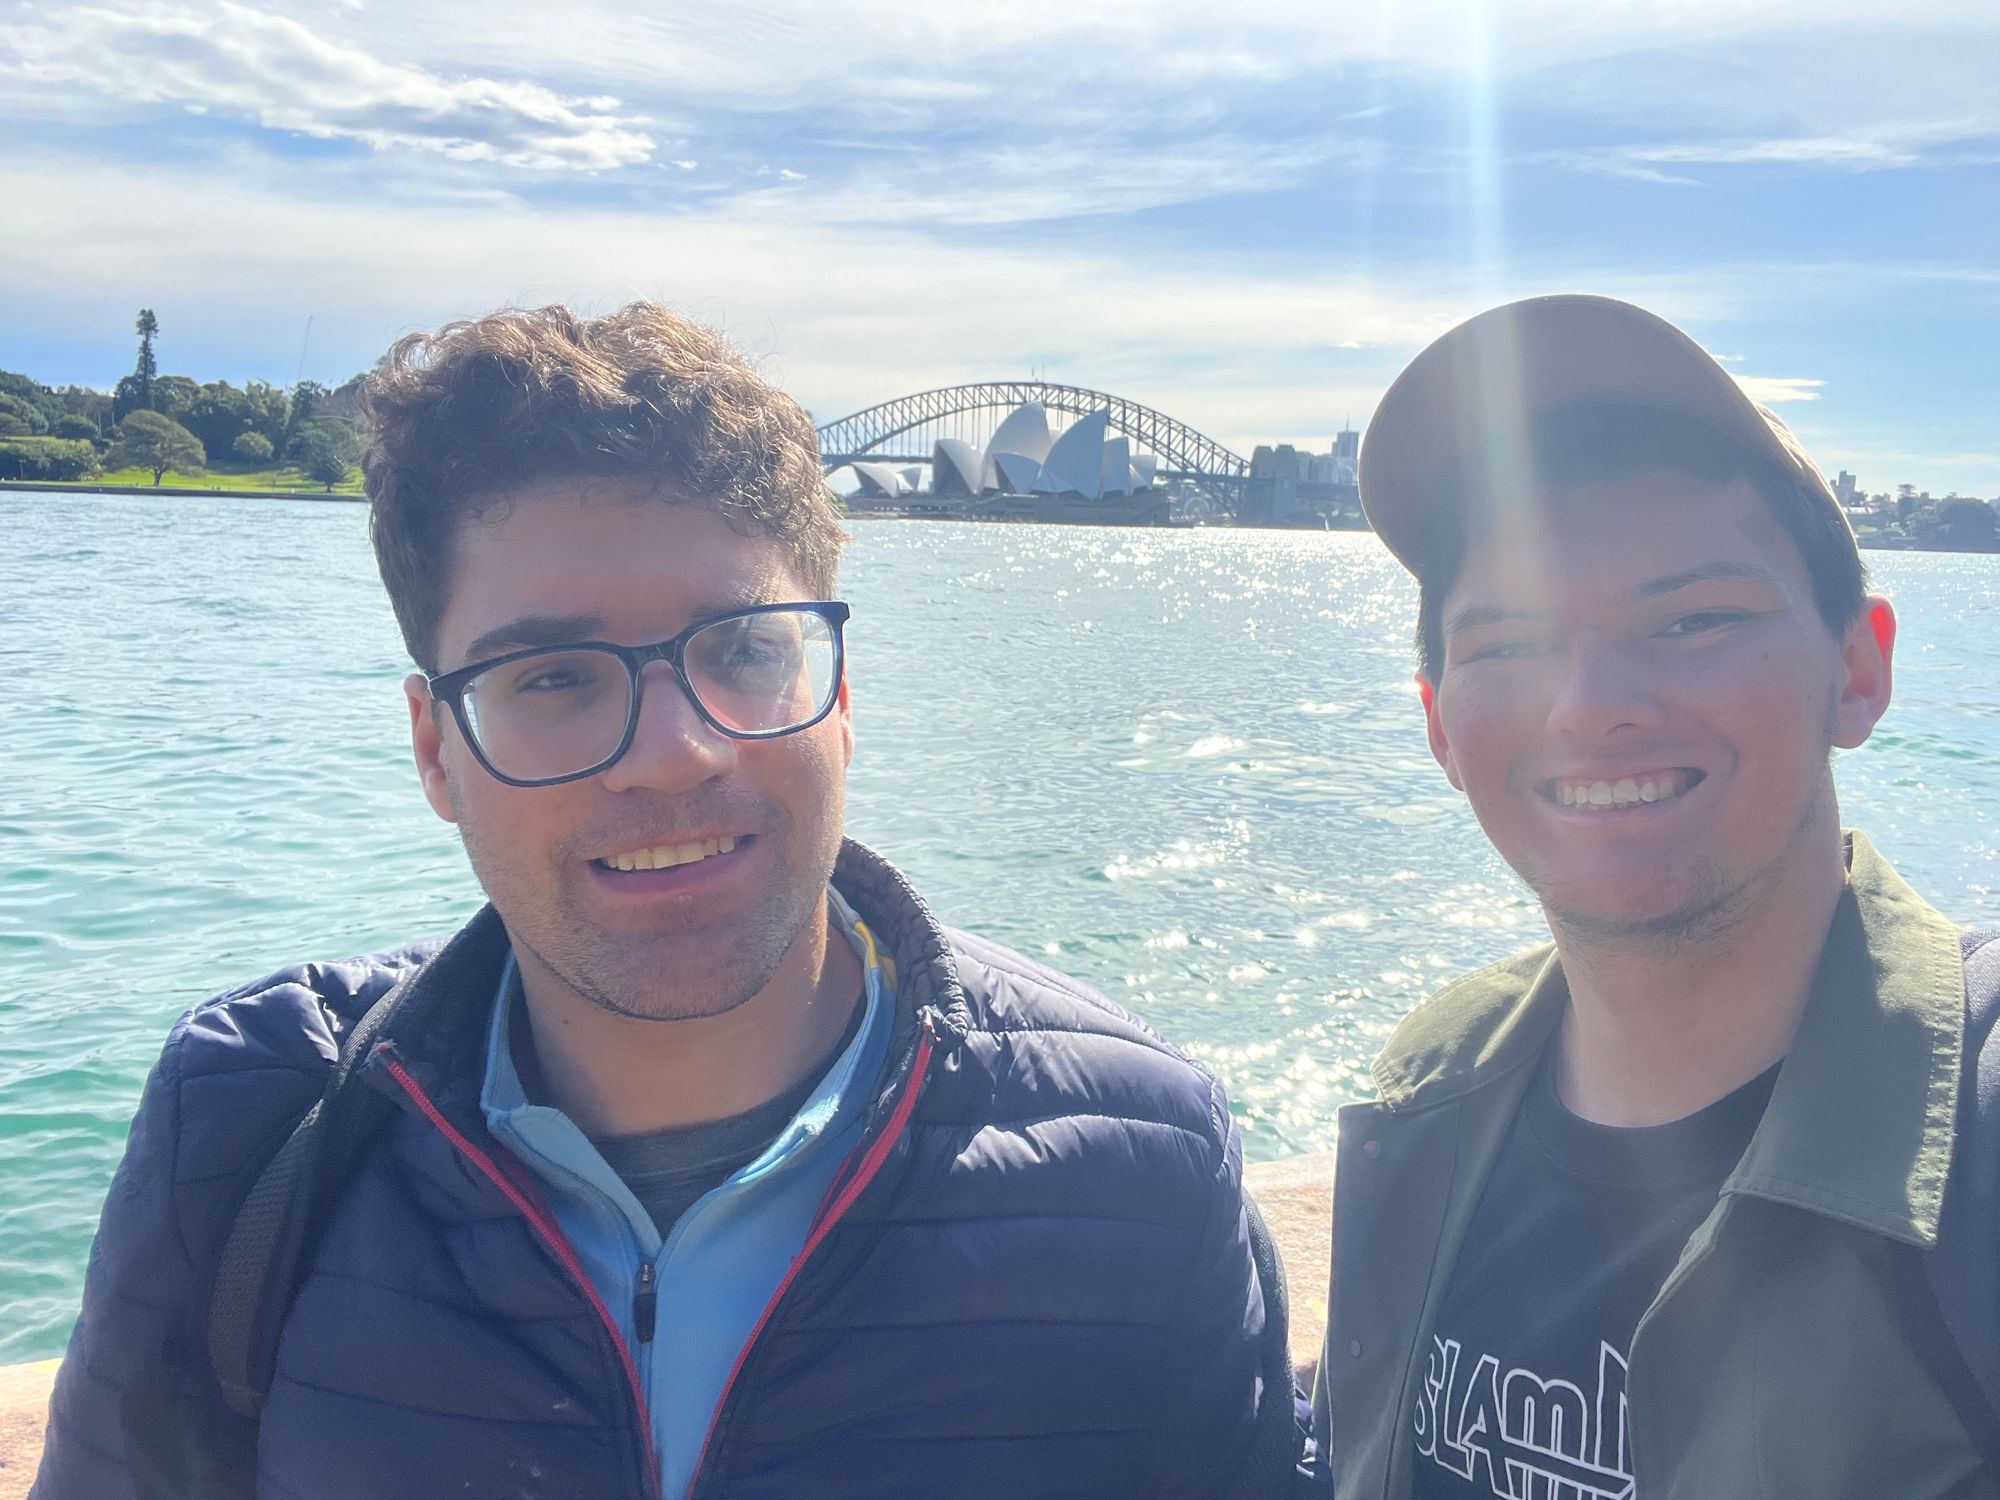 Philip and a Member take a selfie in front of the Sydney Harbour Bridge